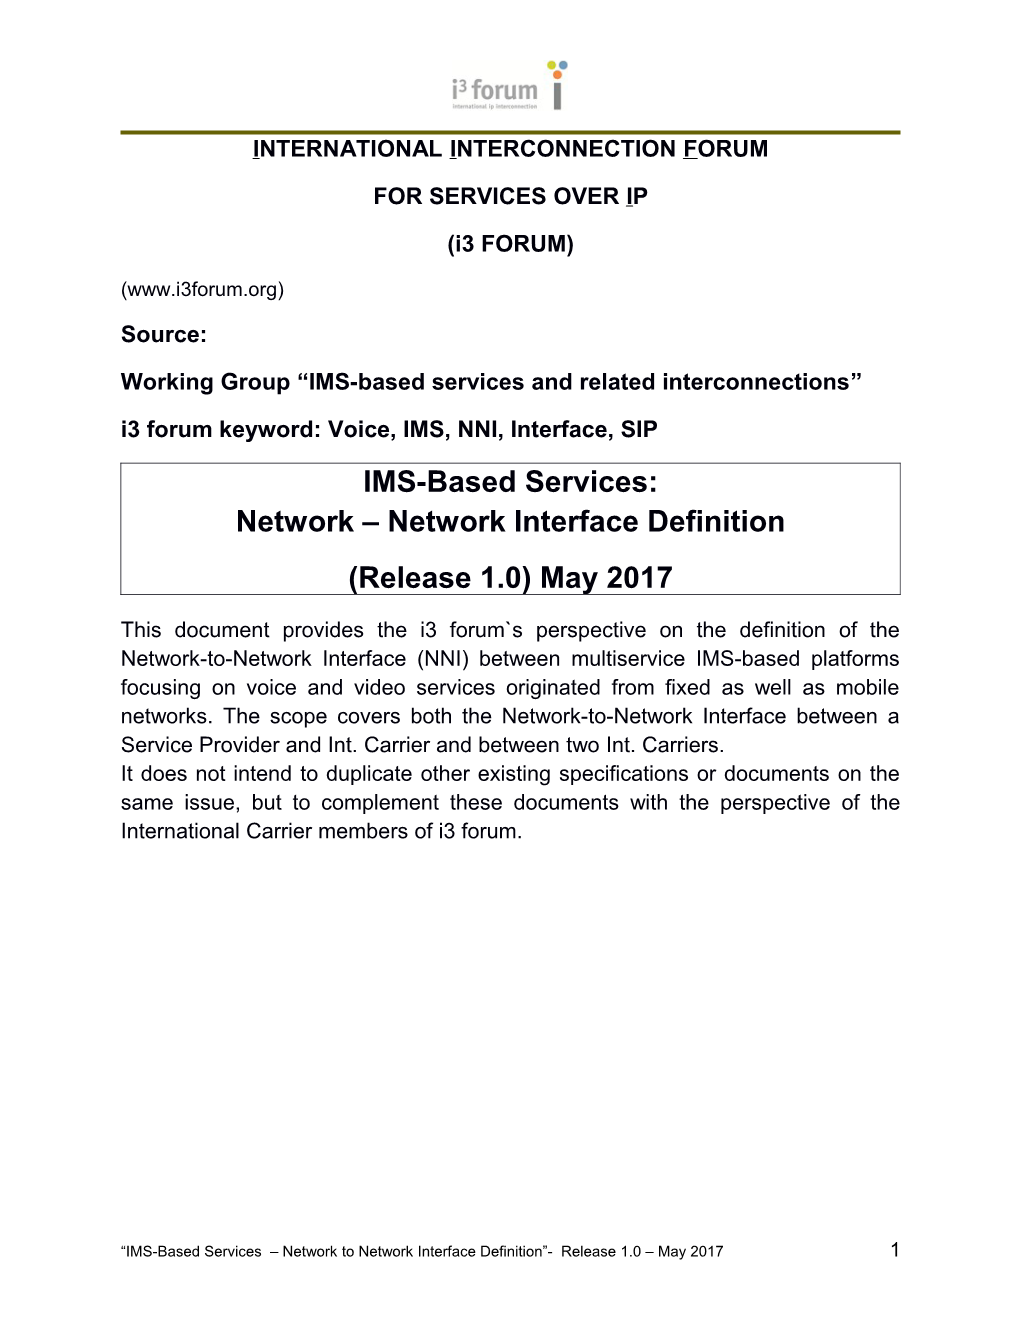 Working Group IMS-Based Services and Related Interconnections